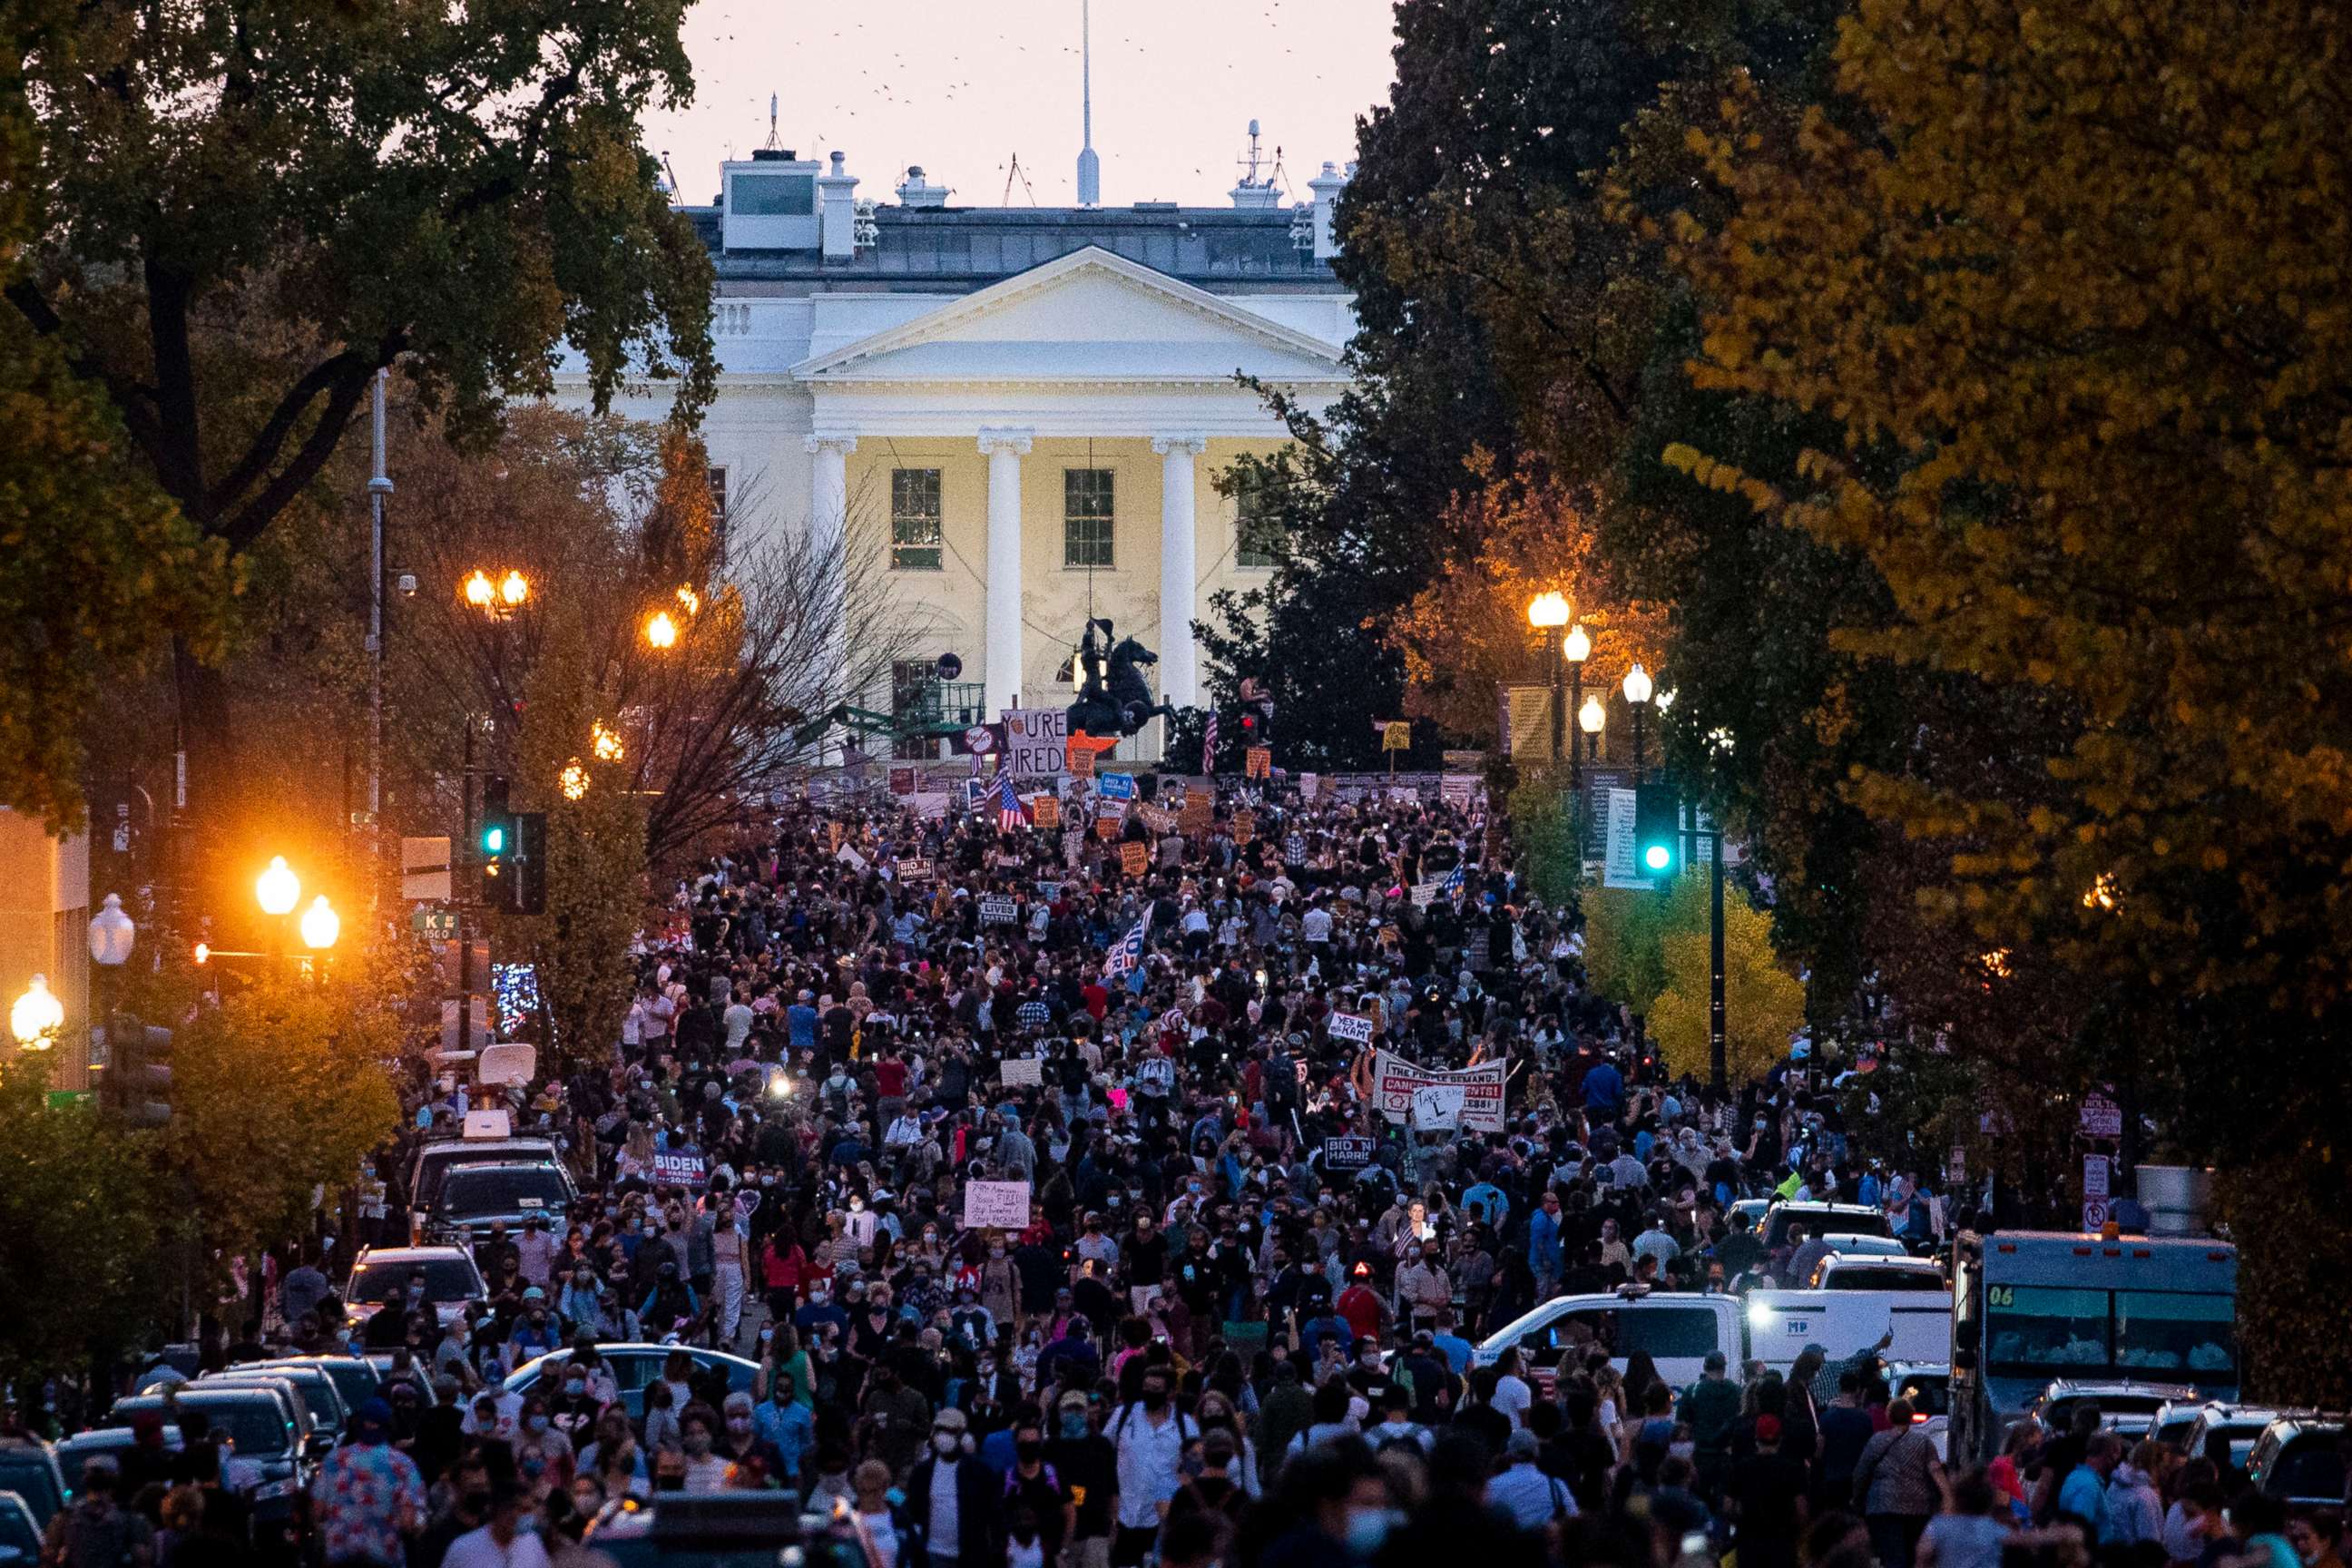 PHOTO: People gather in Black Lives Matter Plaza near the White House as they celebrate after Democratic nominee Joe Biden was declared winner of the 2020 presidential election on Nov. 7, 2020 in Washington, DC.